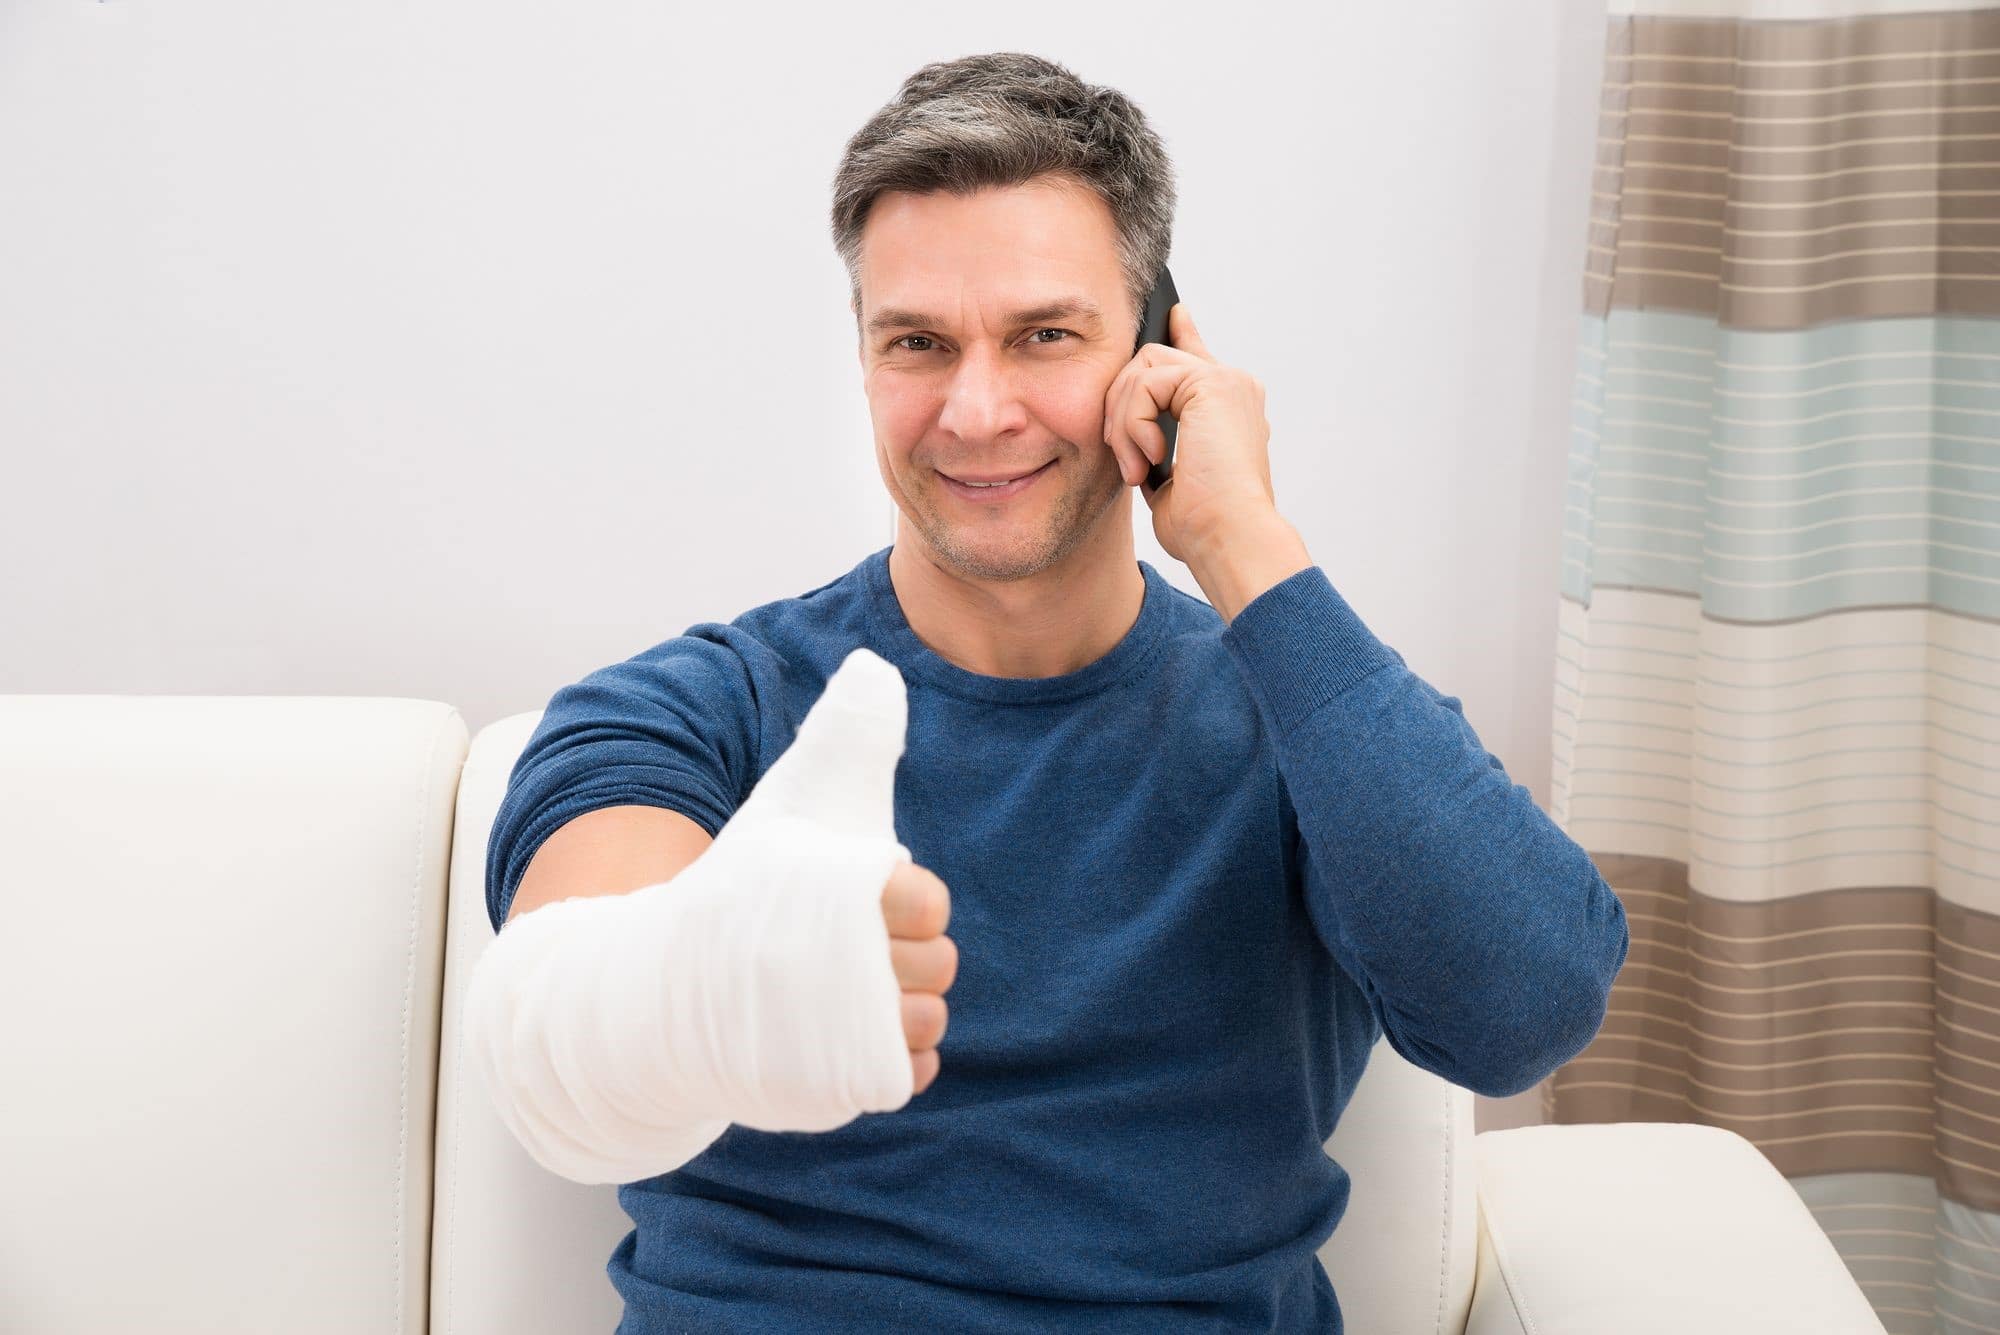 Call a Personal Injury Lawyer and Take Smart Steps to Filing a Claim